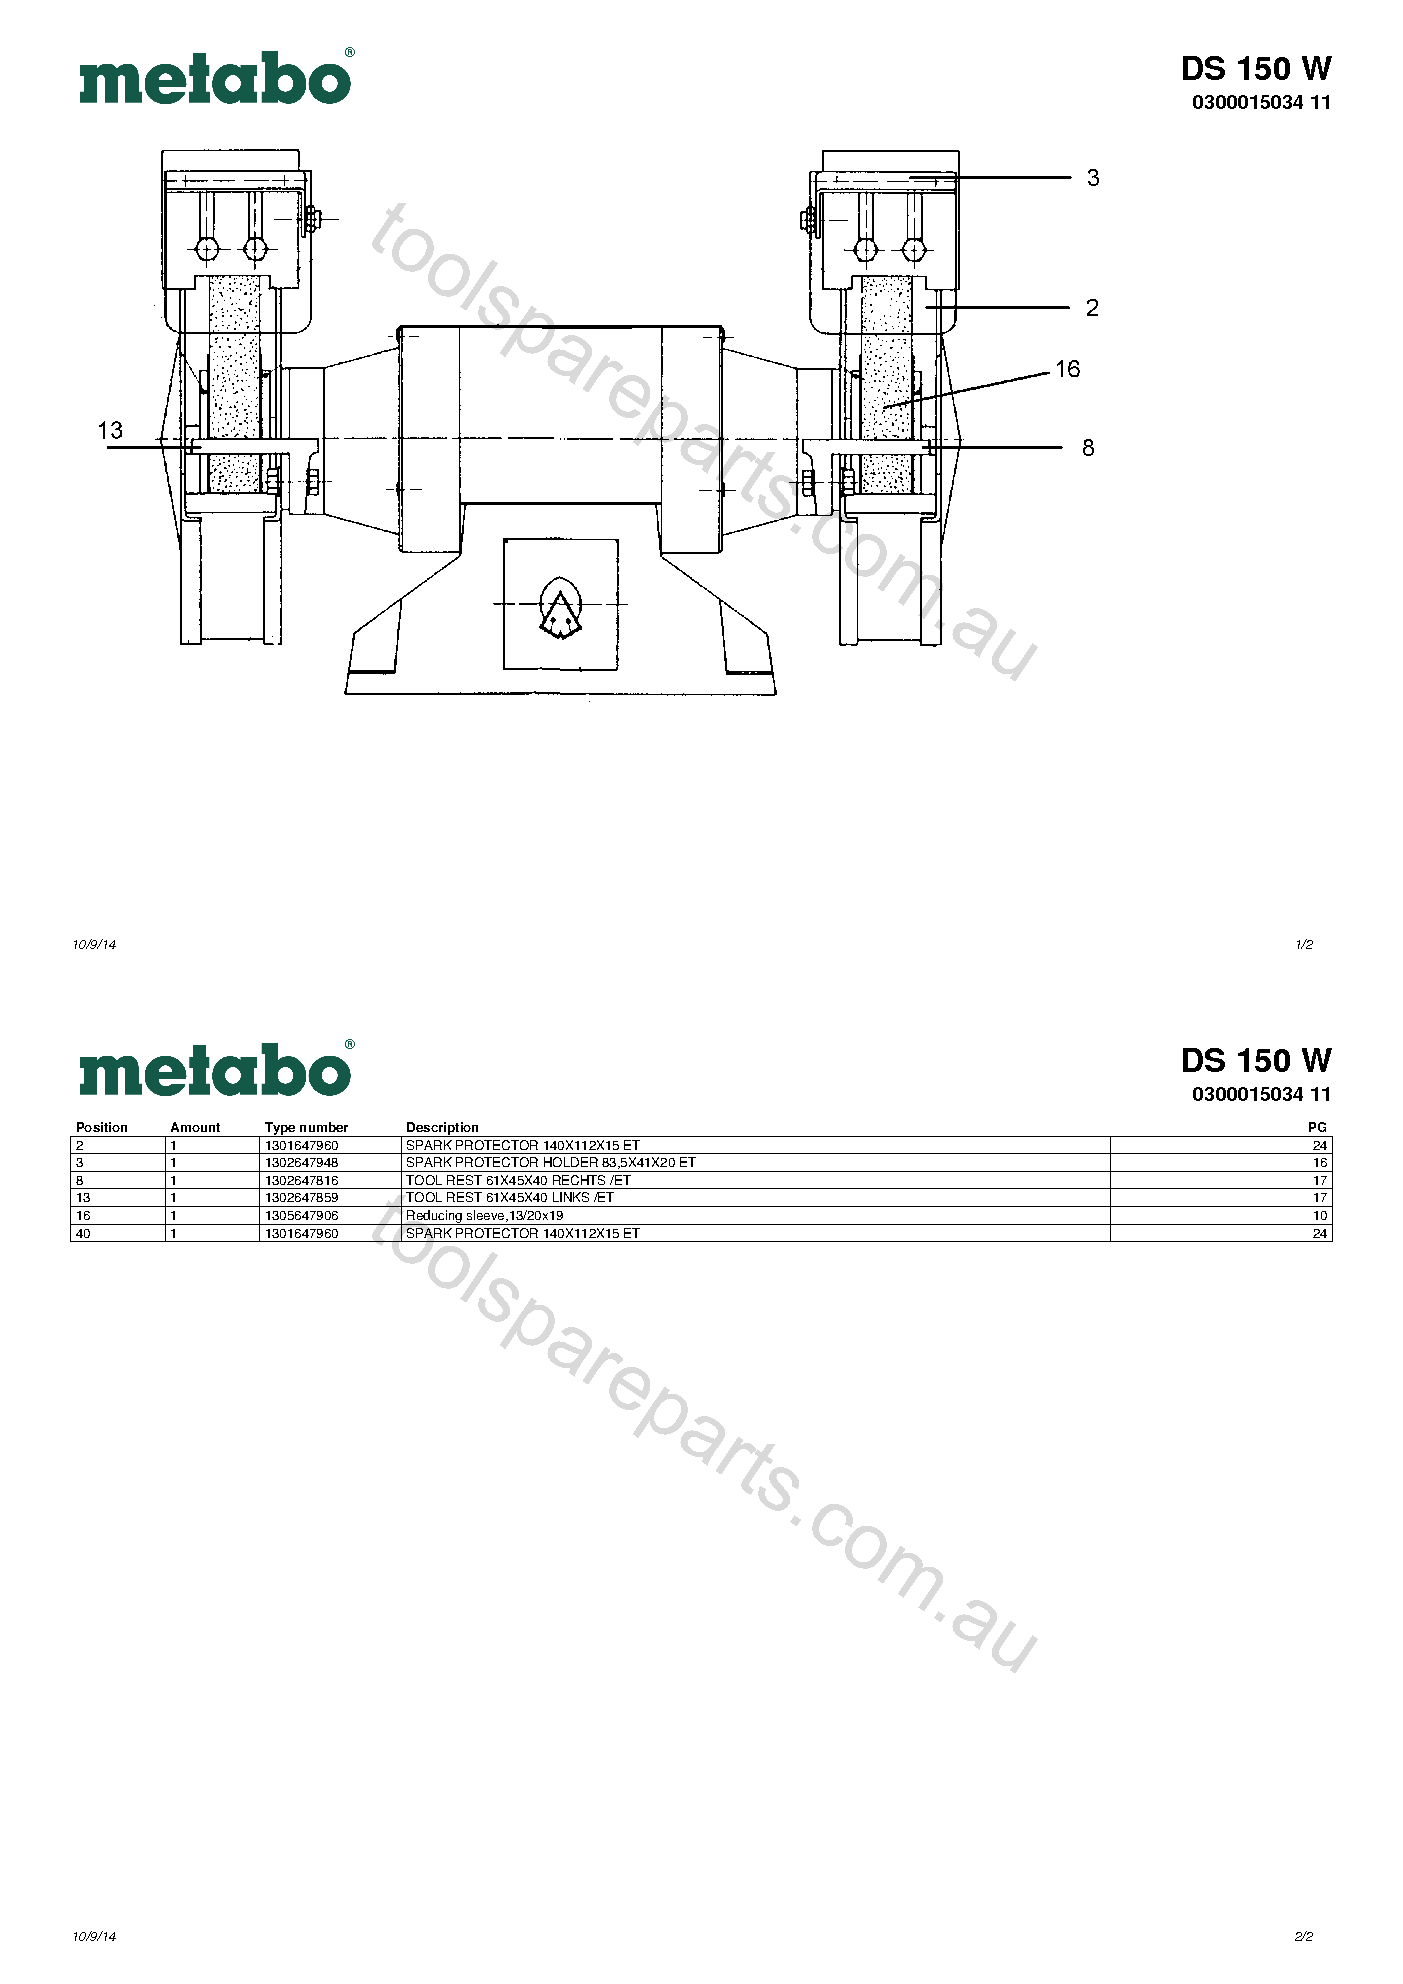 Metabo DS 150 W 0300015034 11  Diagram 1